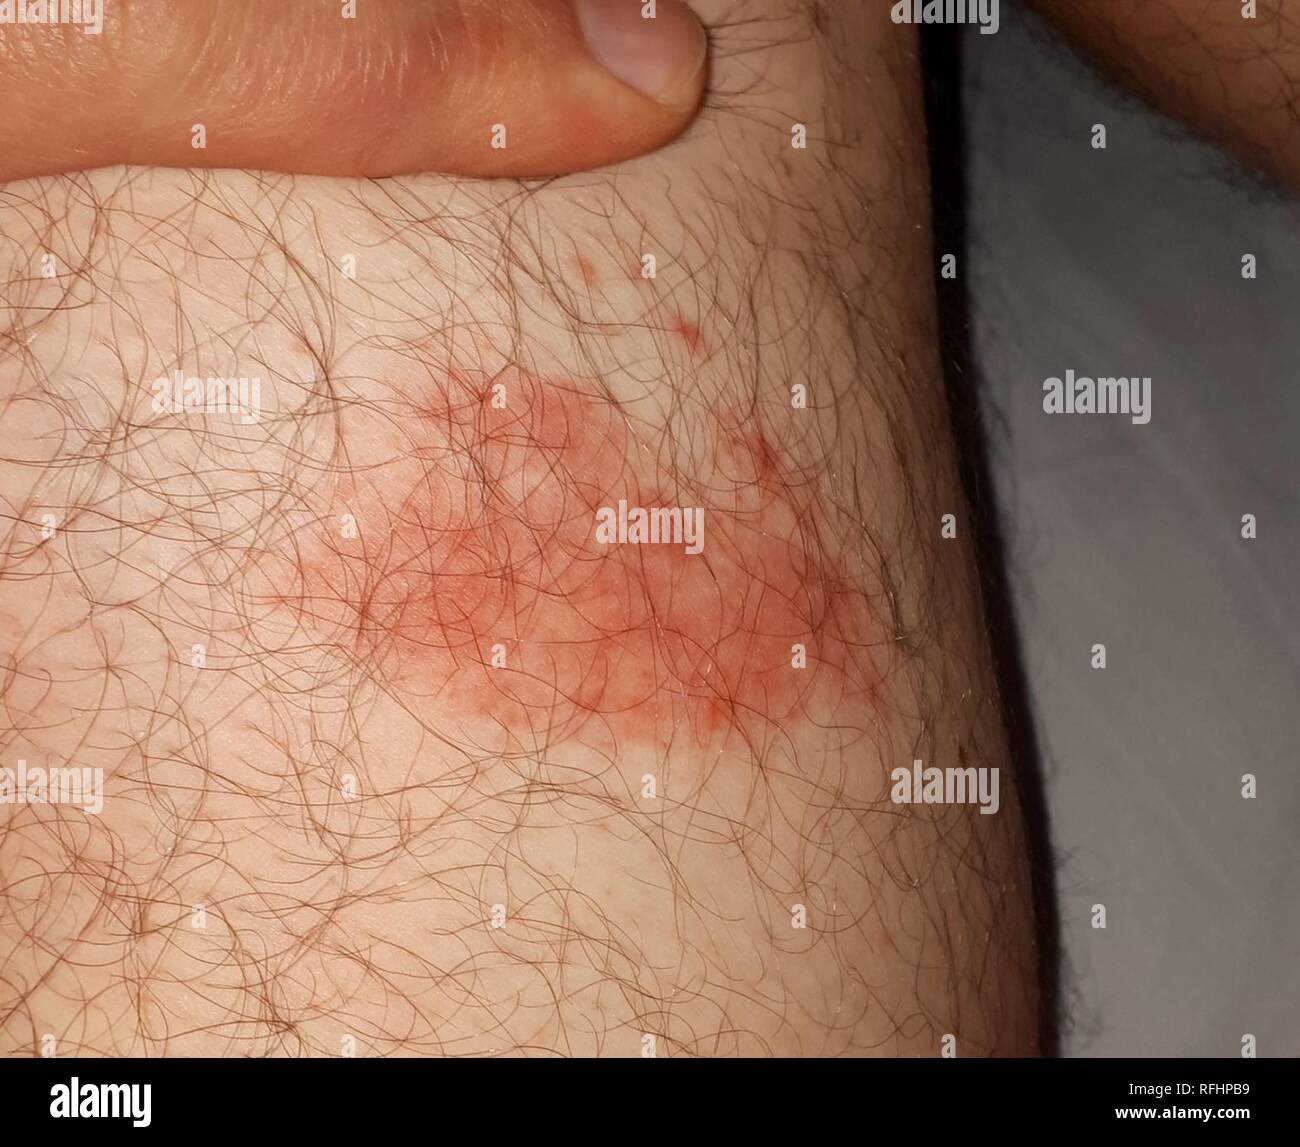 Atypical erythema migrans 1 week after initial presentation. Stock Photo